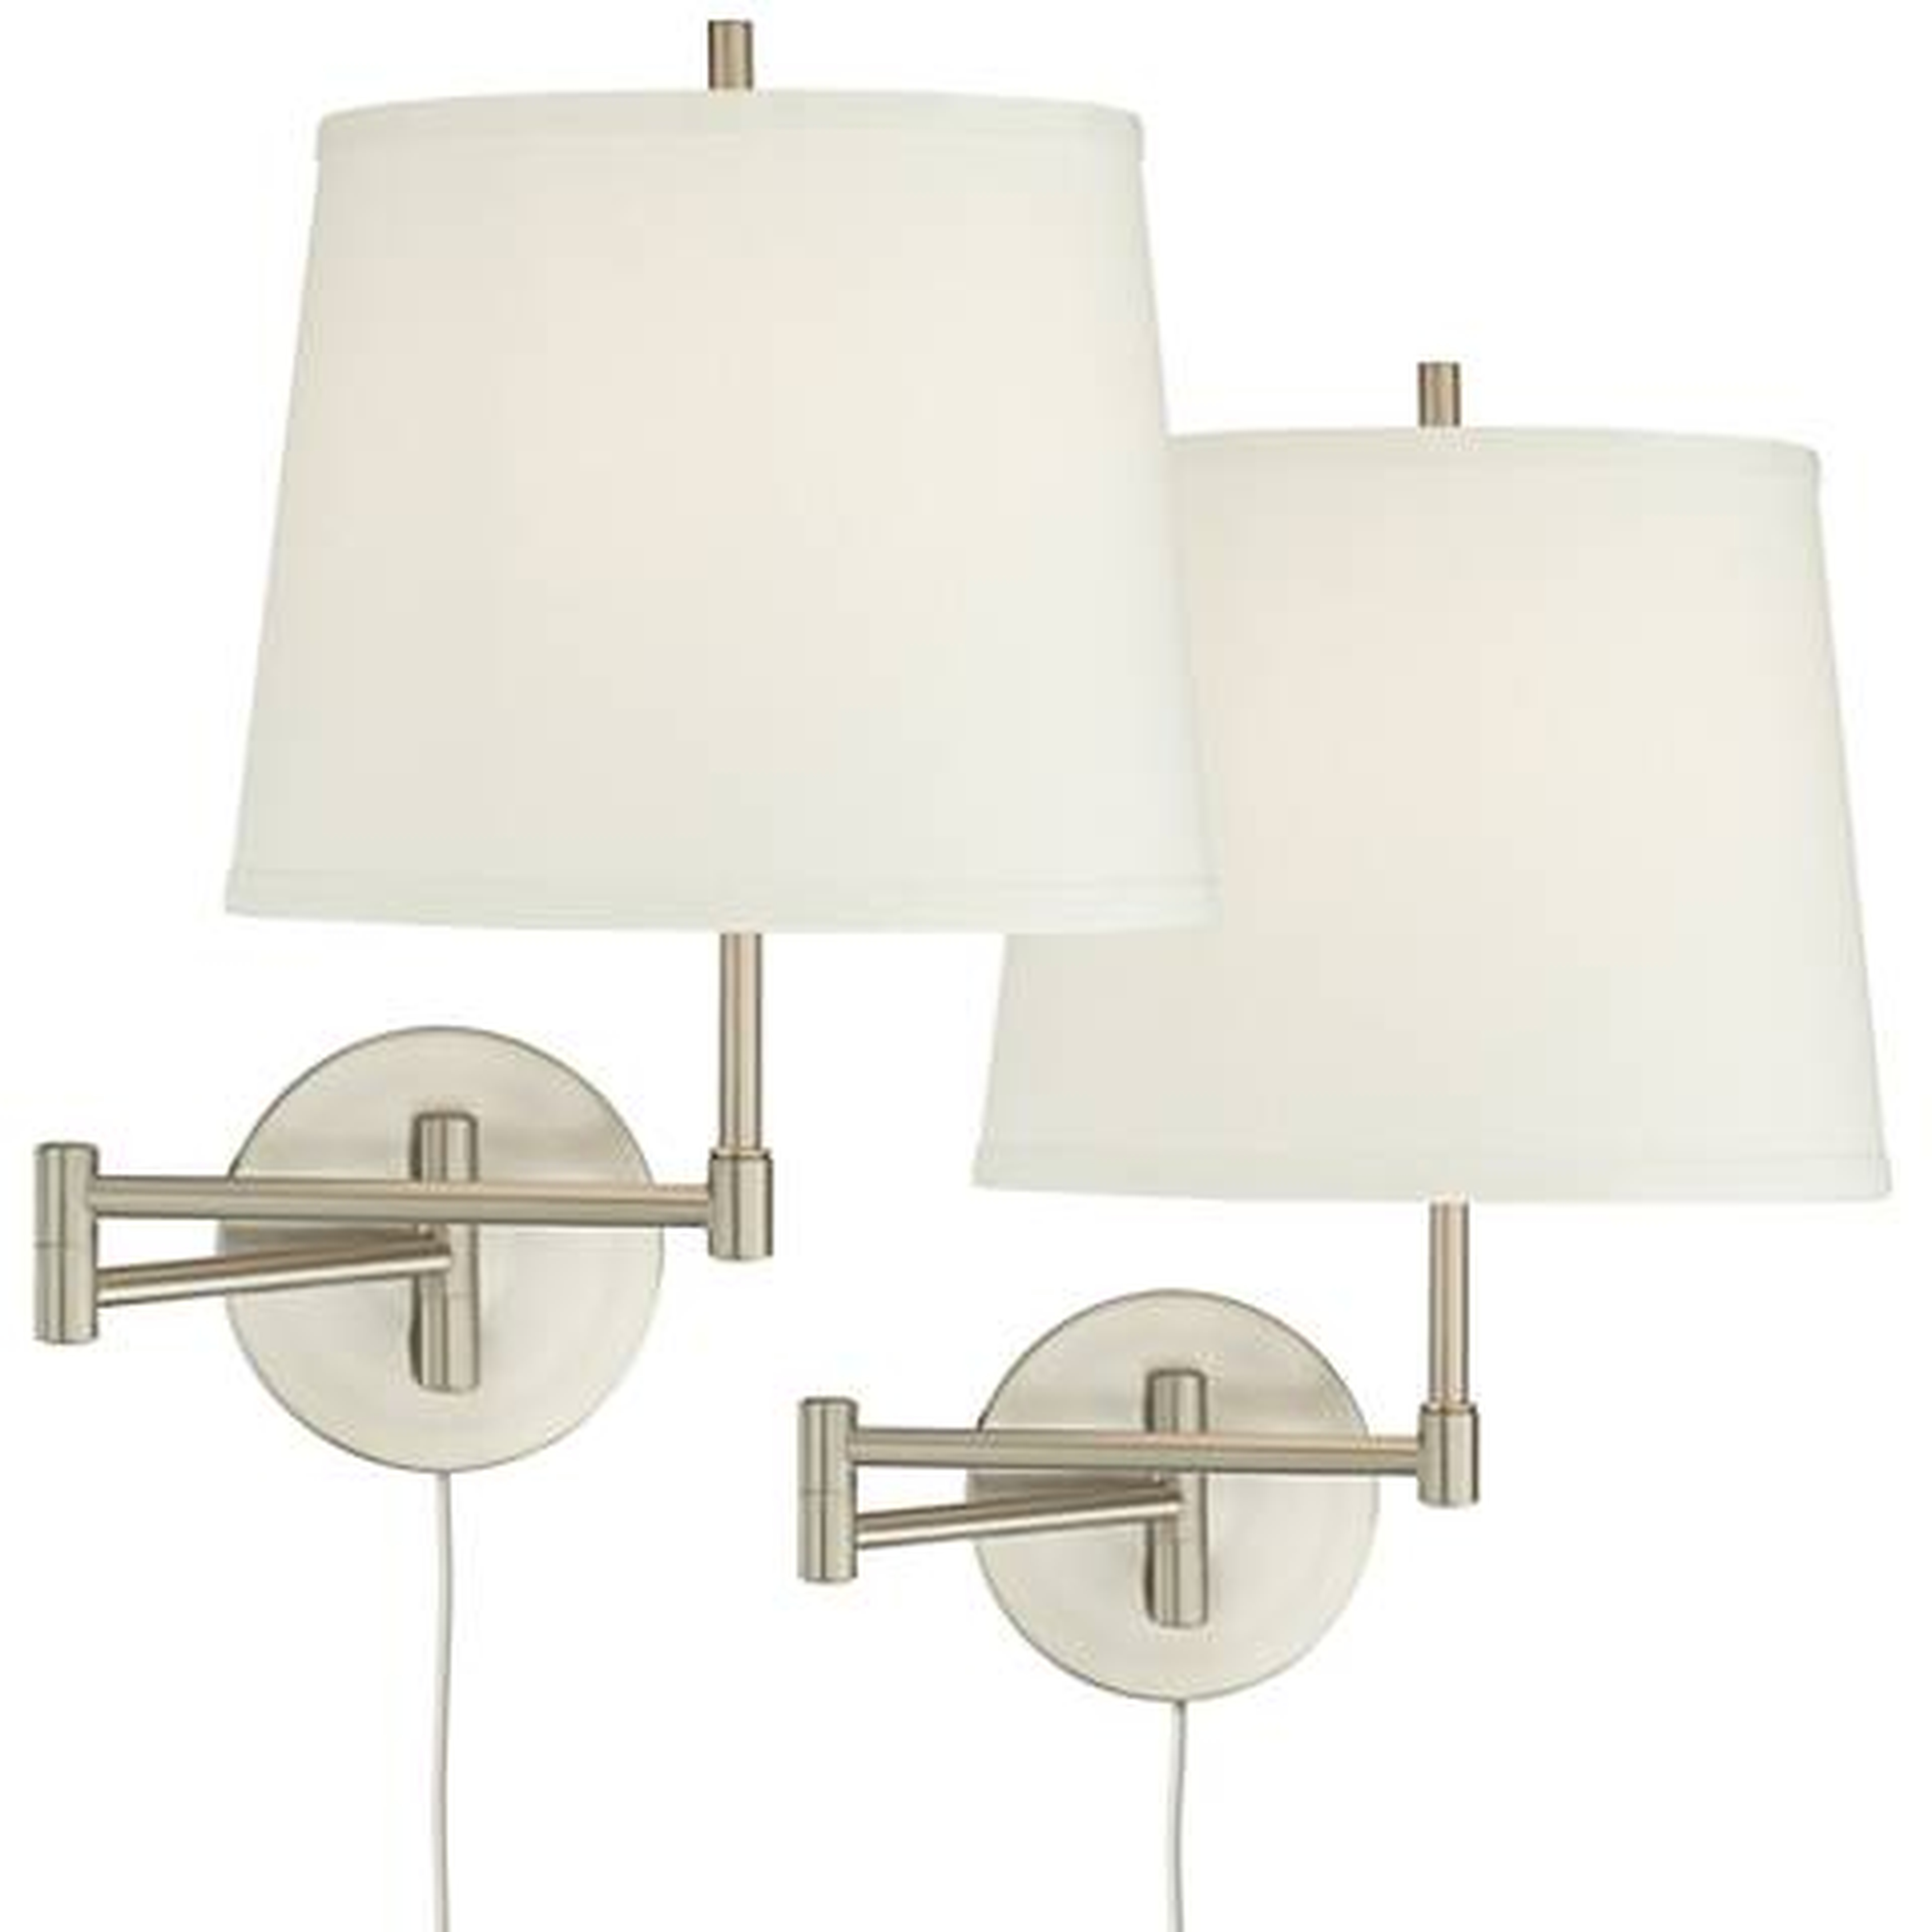 Oray Brushed Steel Swing Arm Wall Lamp Set of 2 - Lamps Plus